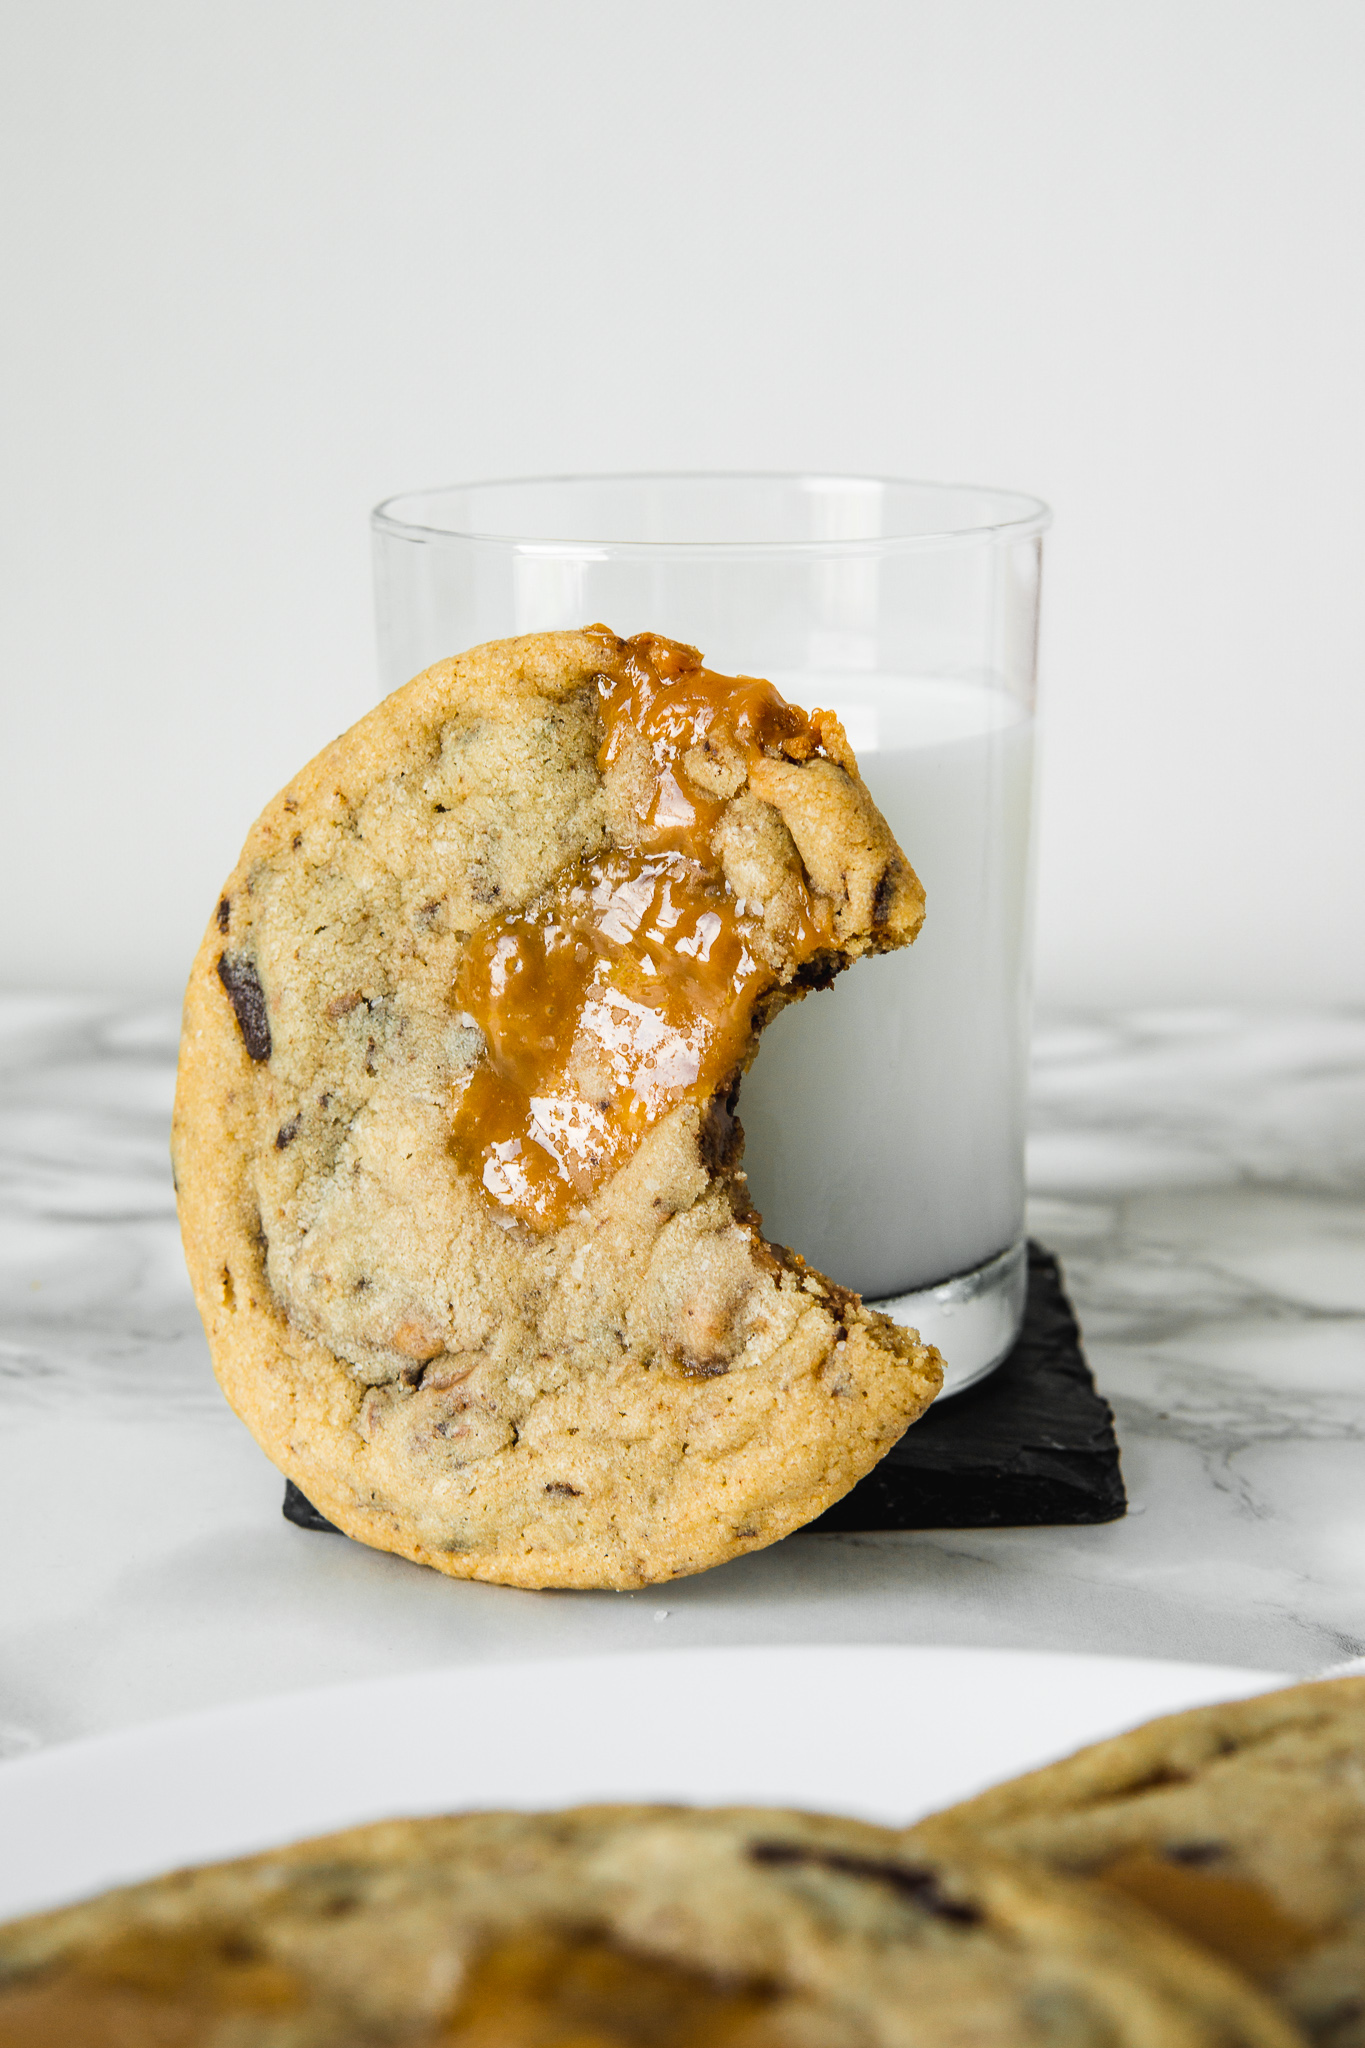 The Golden Cookie – aka The BEST Caramel Chocolate Chip Cookies!